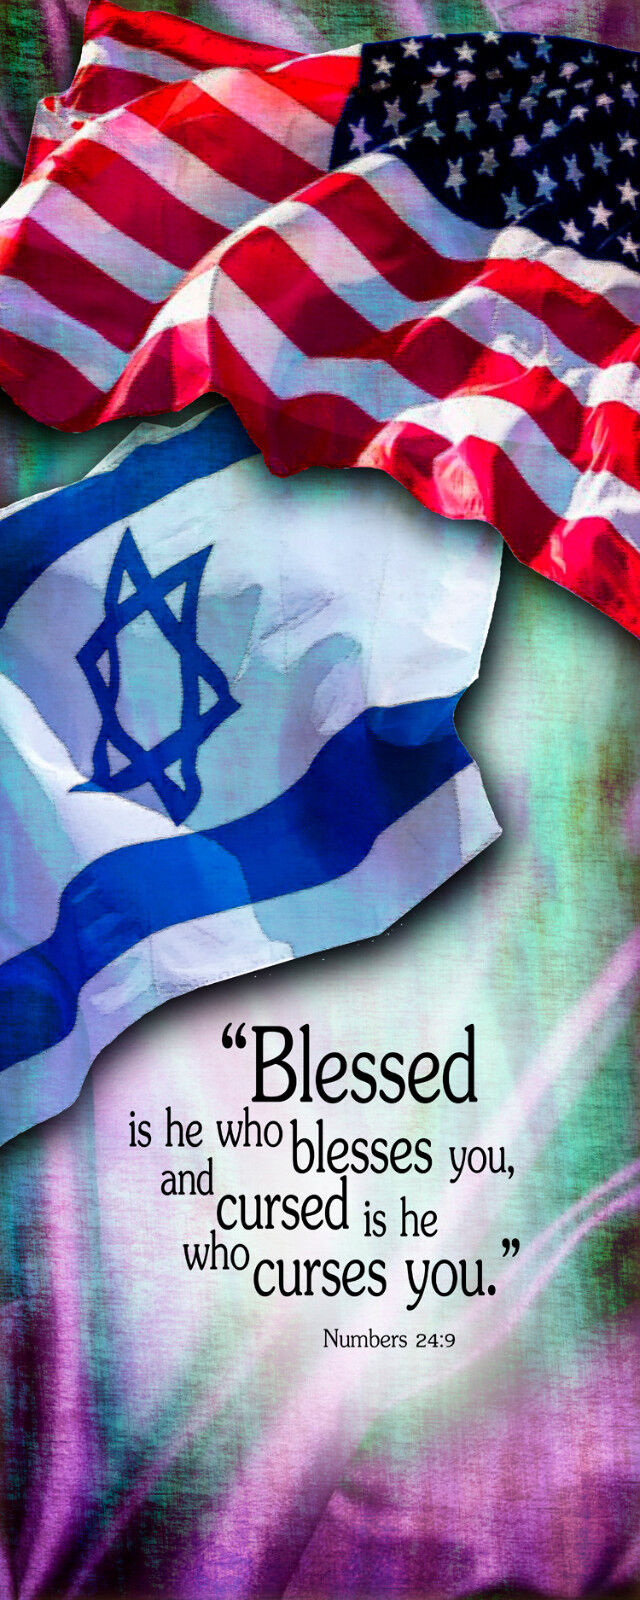 Inspirational Christian Church Banner / Blessed is he . . .  (G1918-1)